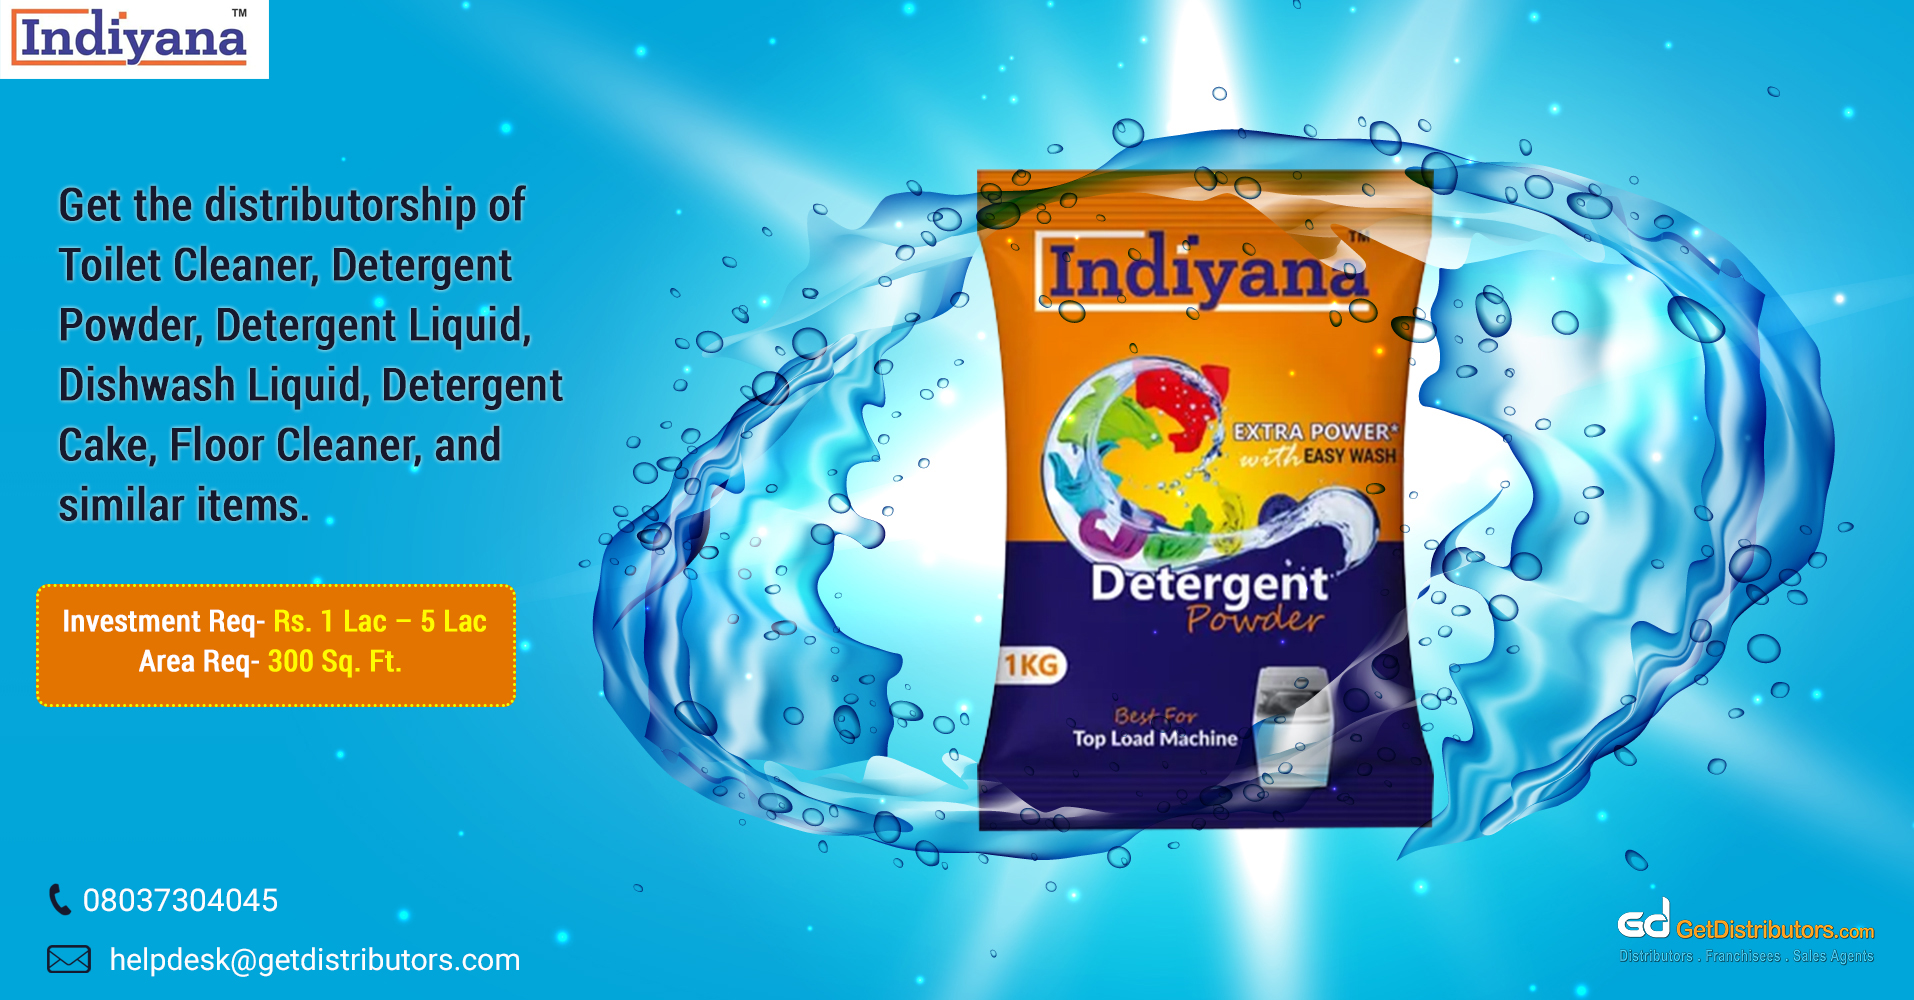 A variety of detergents and cleaning products for distribution